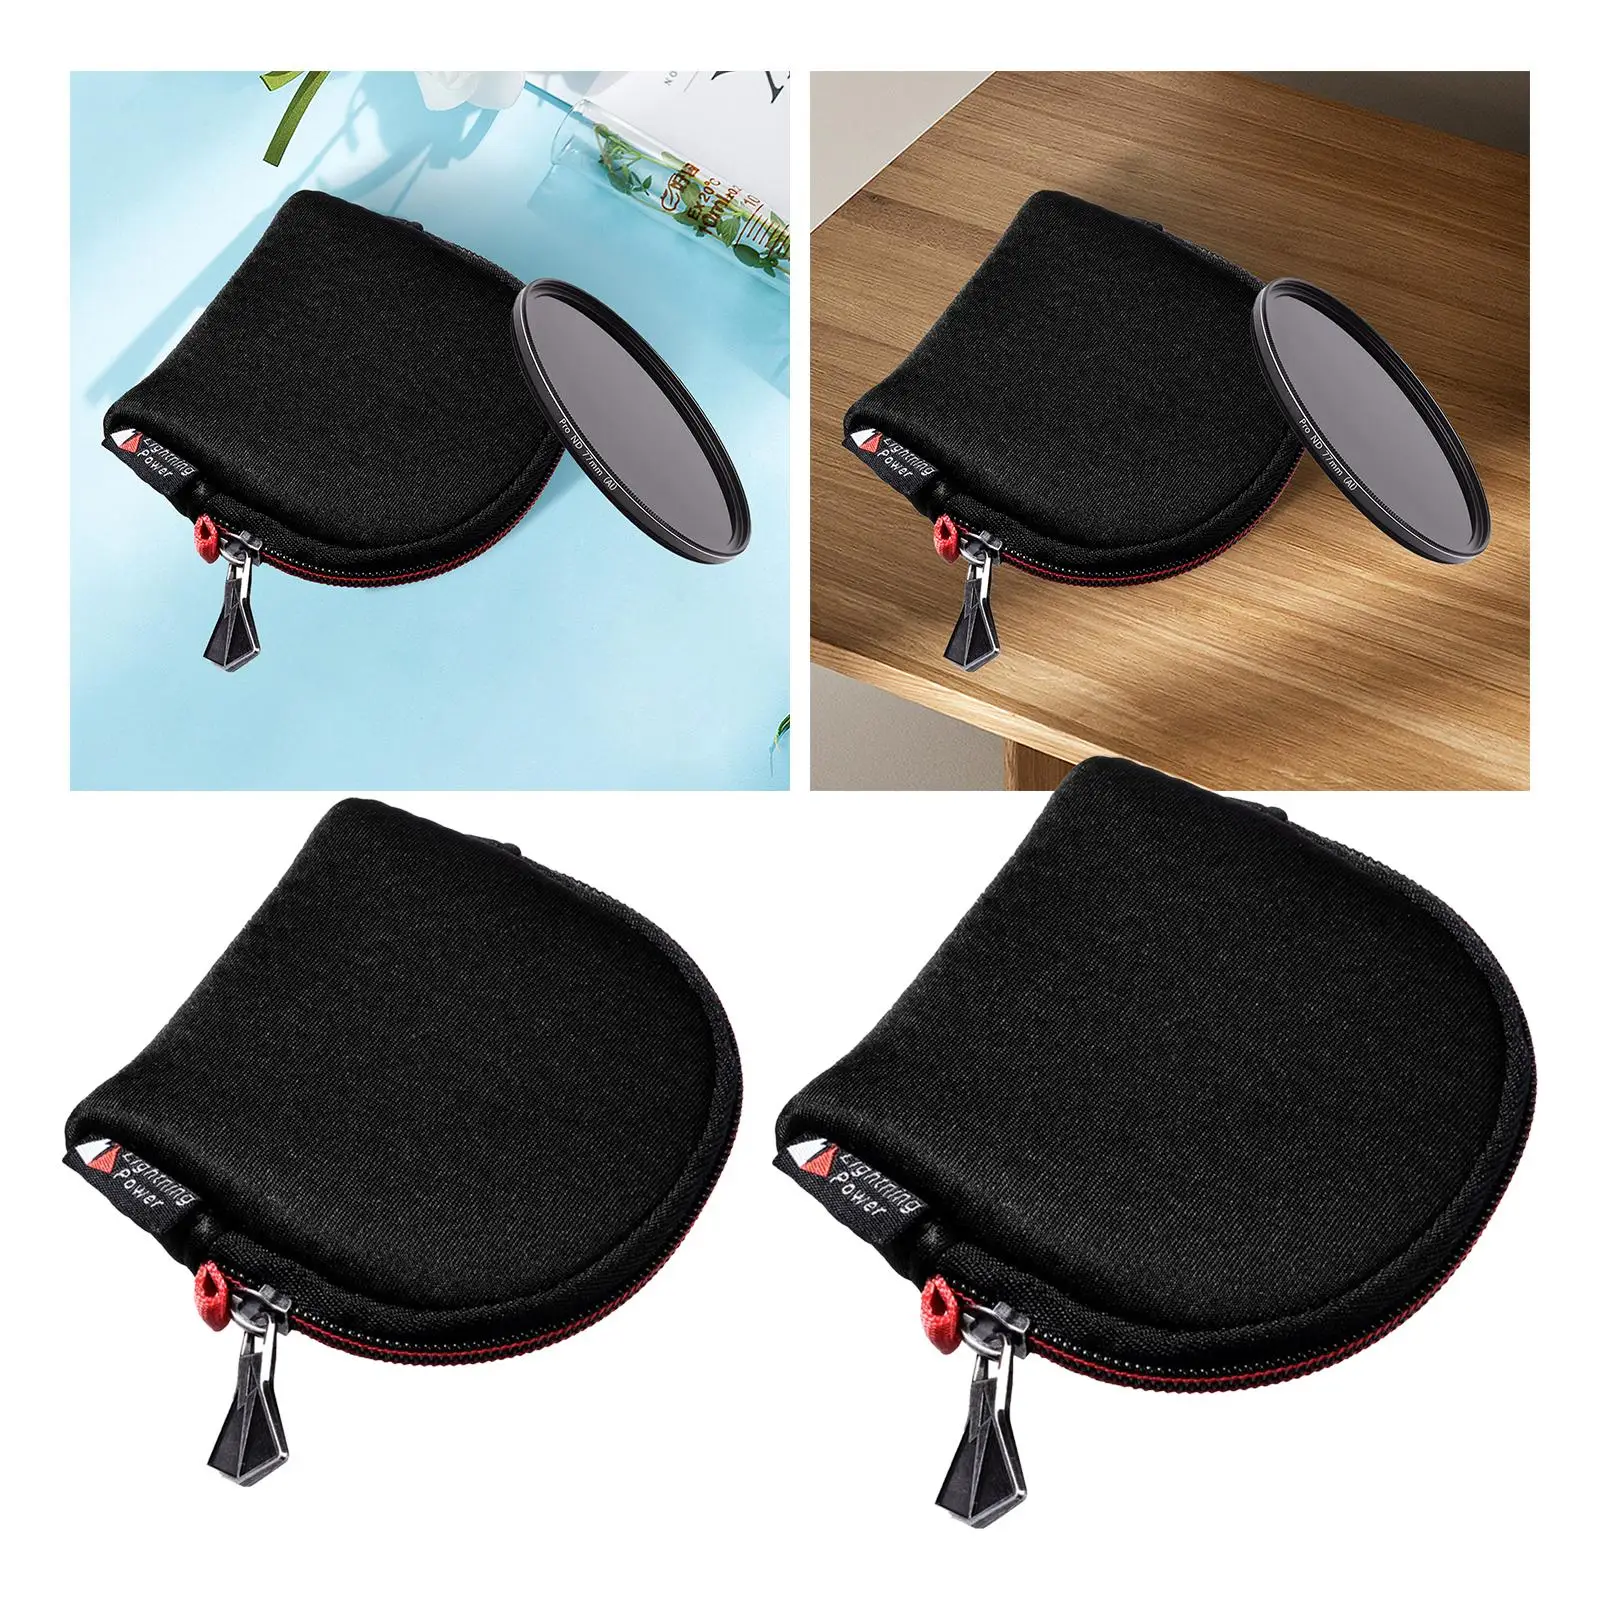 Filter Holder Photography Accessories Professional Waterproof Outside Filter Carrying Case Camera Filter Pouch Lens Filter Bag